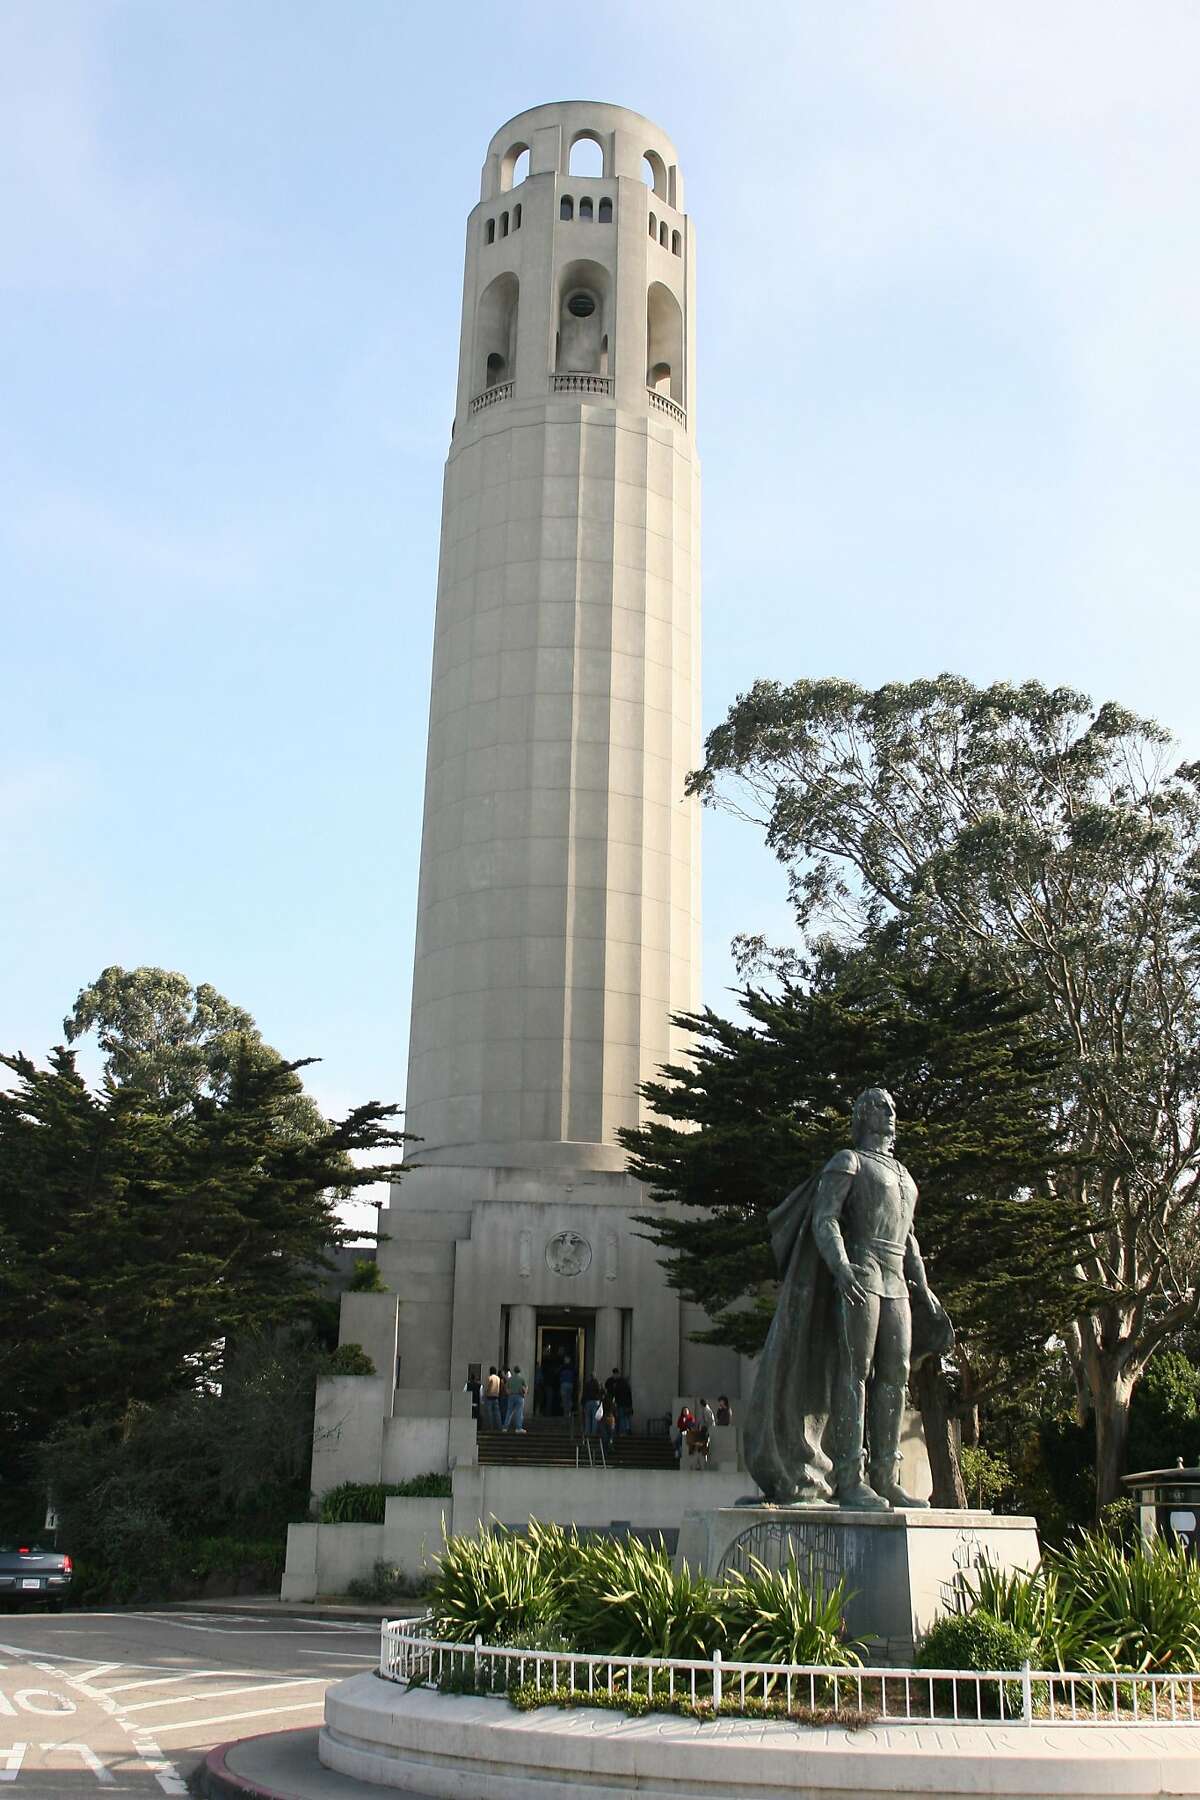 Coit Tower on Telegraph Hill in San Francisco, California. The tower was built with funds from philanthropist Lillie Hitchcock Coit. (Ben Noey Jr./Fort Worth Star-Telegram/MCT)